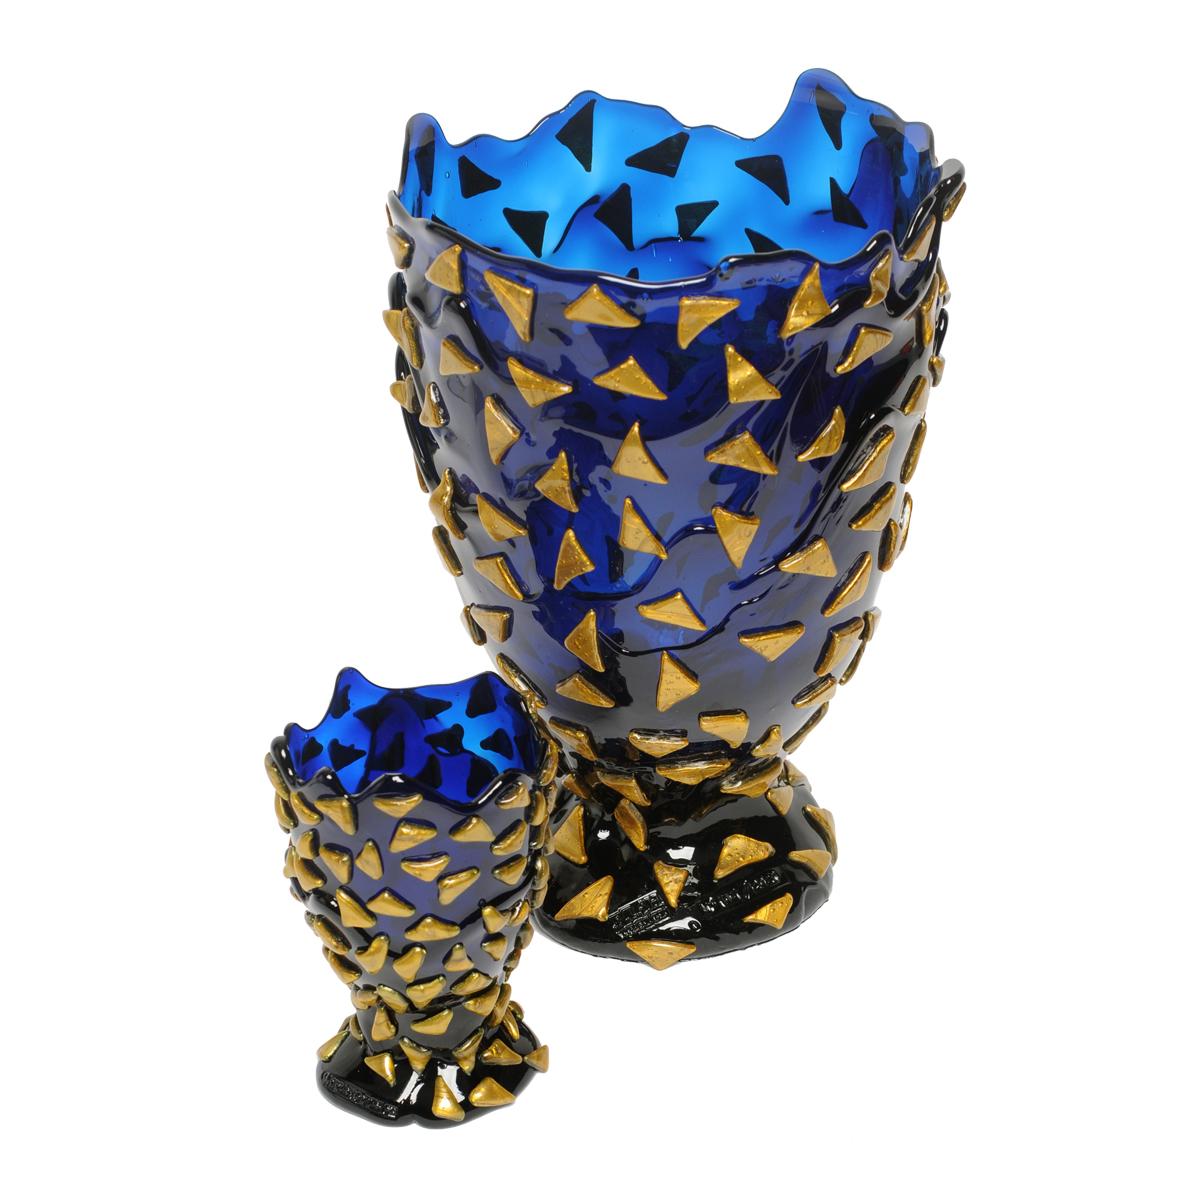 Starry Night vase - Blue and gold.

Vase in soft resin designed by Gaetano Pesce in 1995 for Fish Design collection.

Measures: L - Ø 22cm x H 36cm

Dimensions Available:
S - ø 10.5cm x H 19cm
M - ø 16cm x H 26cm
L - ø 22cm x H 36cm
XL - ø